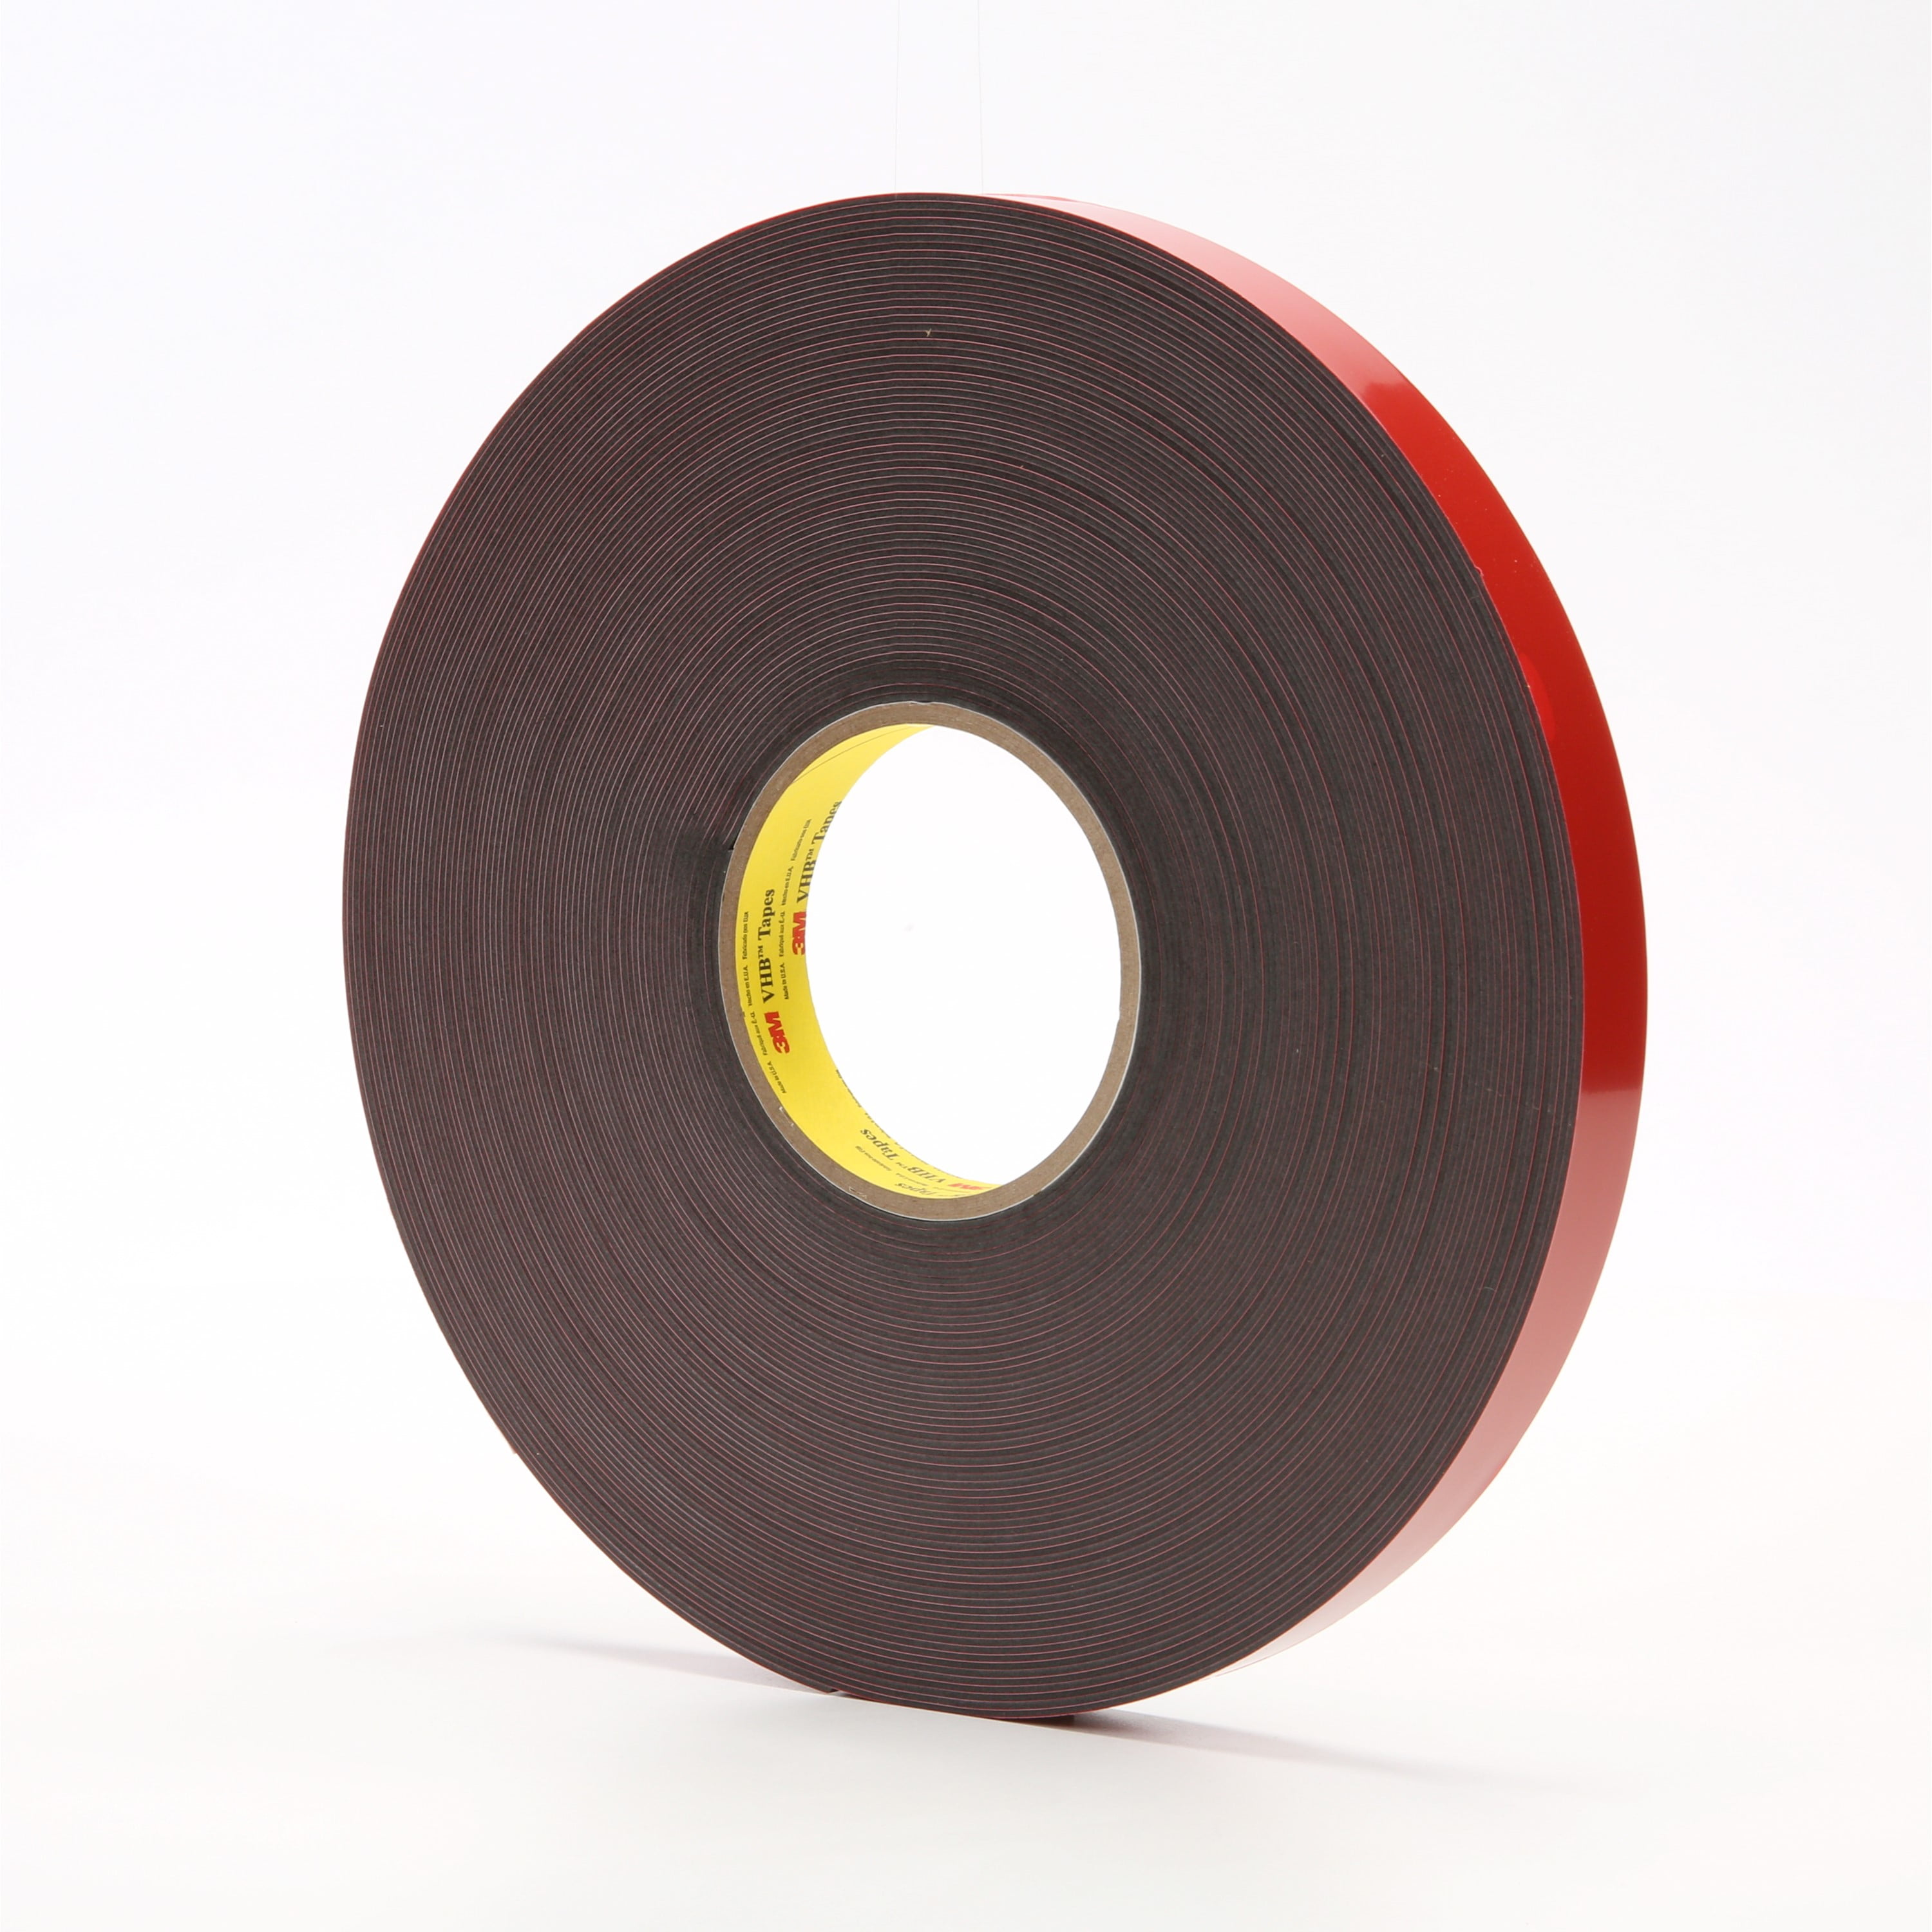 3M VHB 4611 Tape Roll - 0.5 in. x 15 ft. Dark Gray Acrylic Adhesive -  Double Sided Tape with Firm Foam